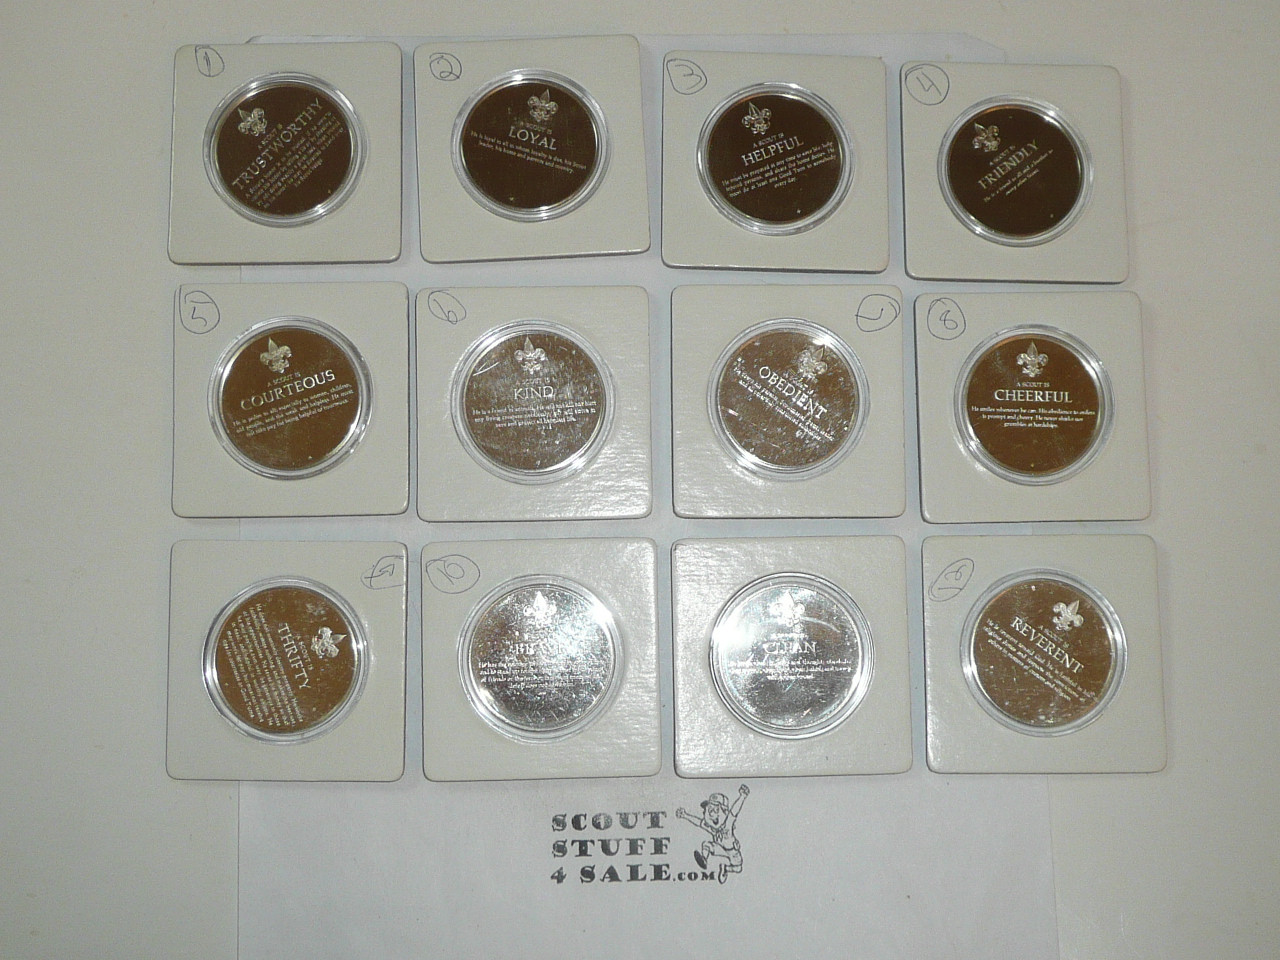 Norman Rockwell's Spirit of Scouting 12 Silver Coin/medal Set from the 1970's